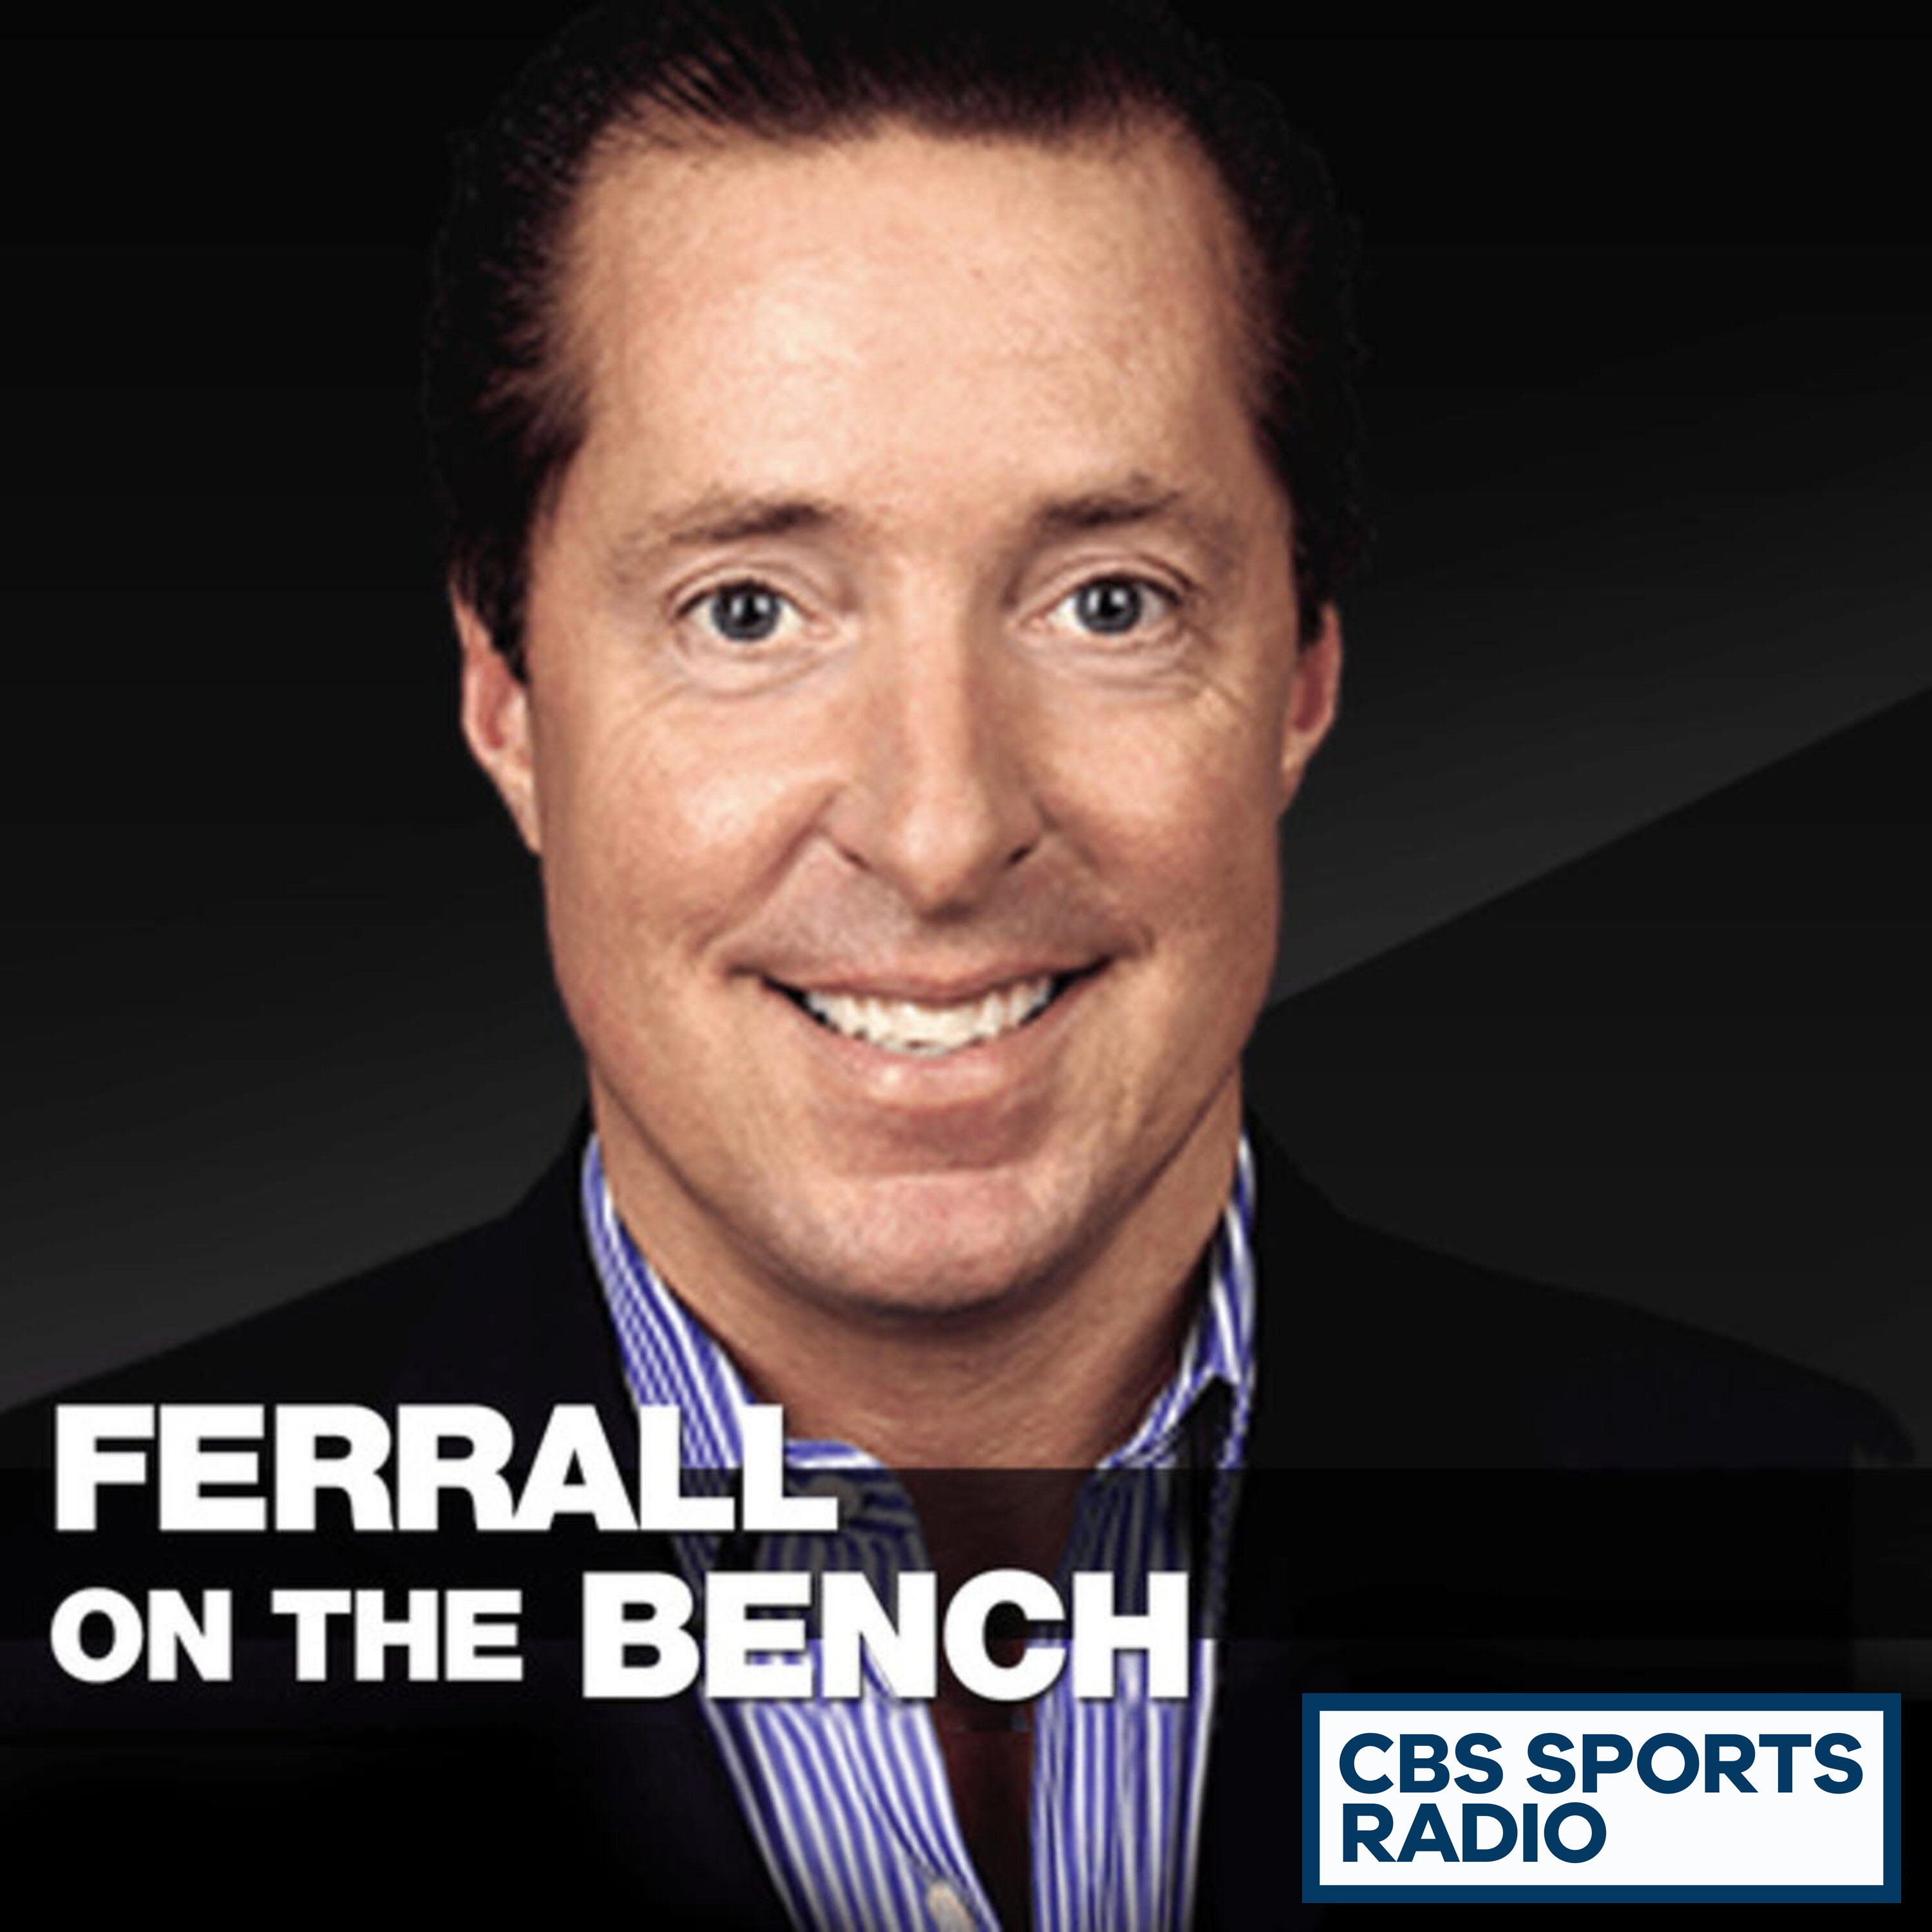 12-04-19 - Ferrall On The Bench - Ferrall on Helton/USC and Ohio State/Michigan